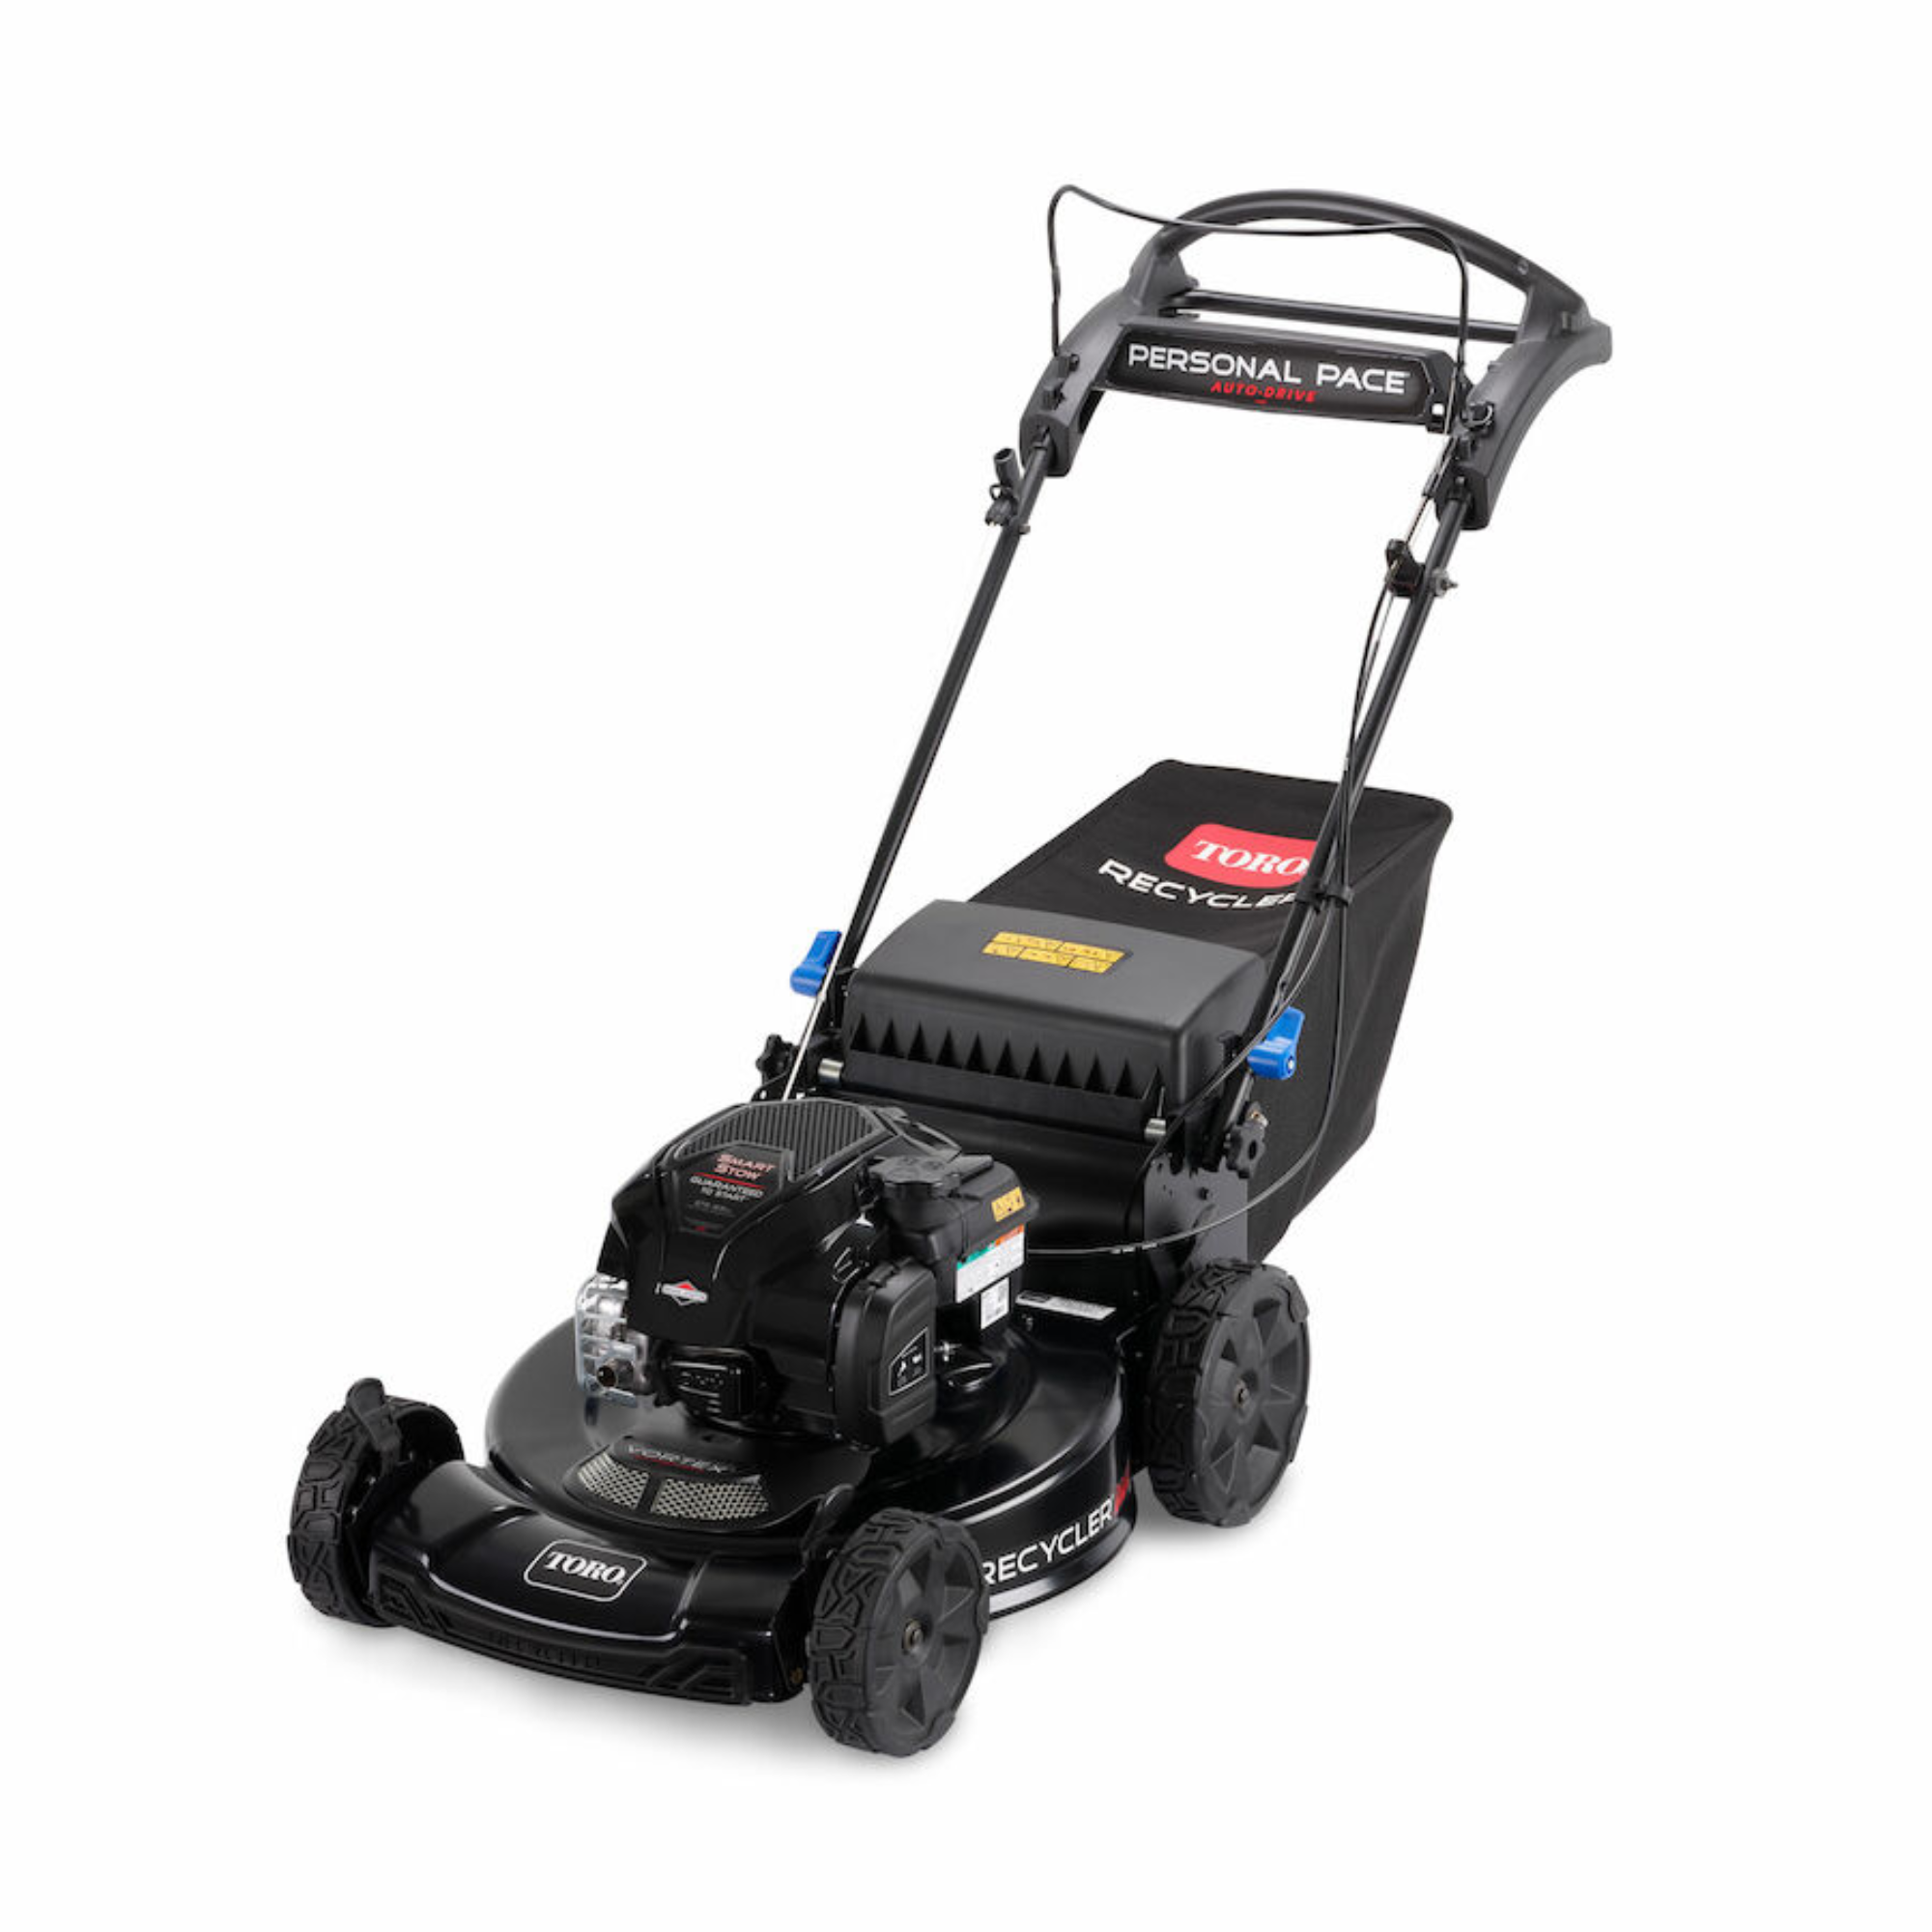 Toro Recycler Max w/ Personal Pace & SmartStow Gas Lawn Mower | 22 in. Deck | 21485